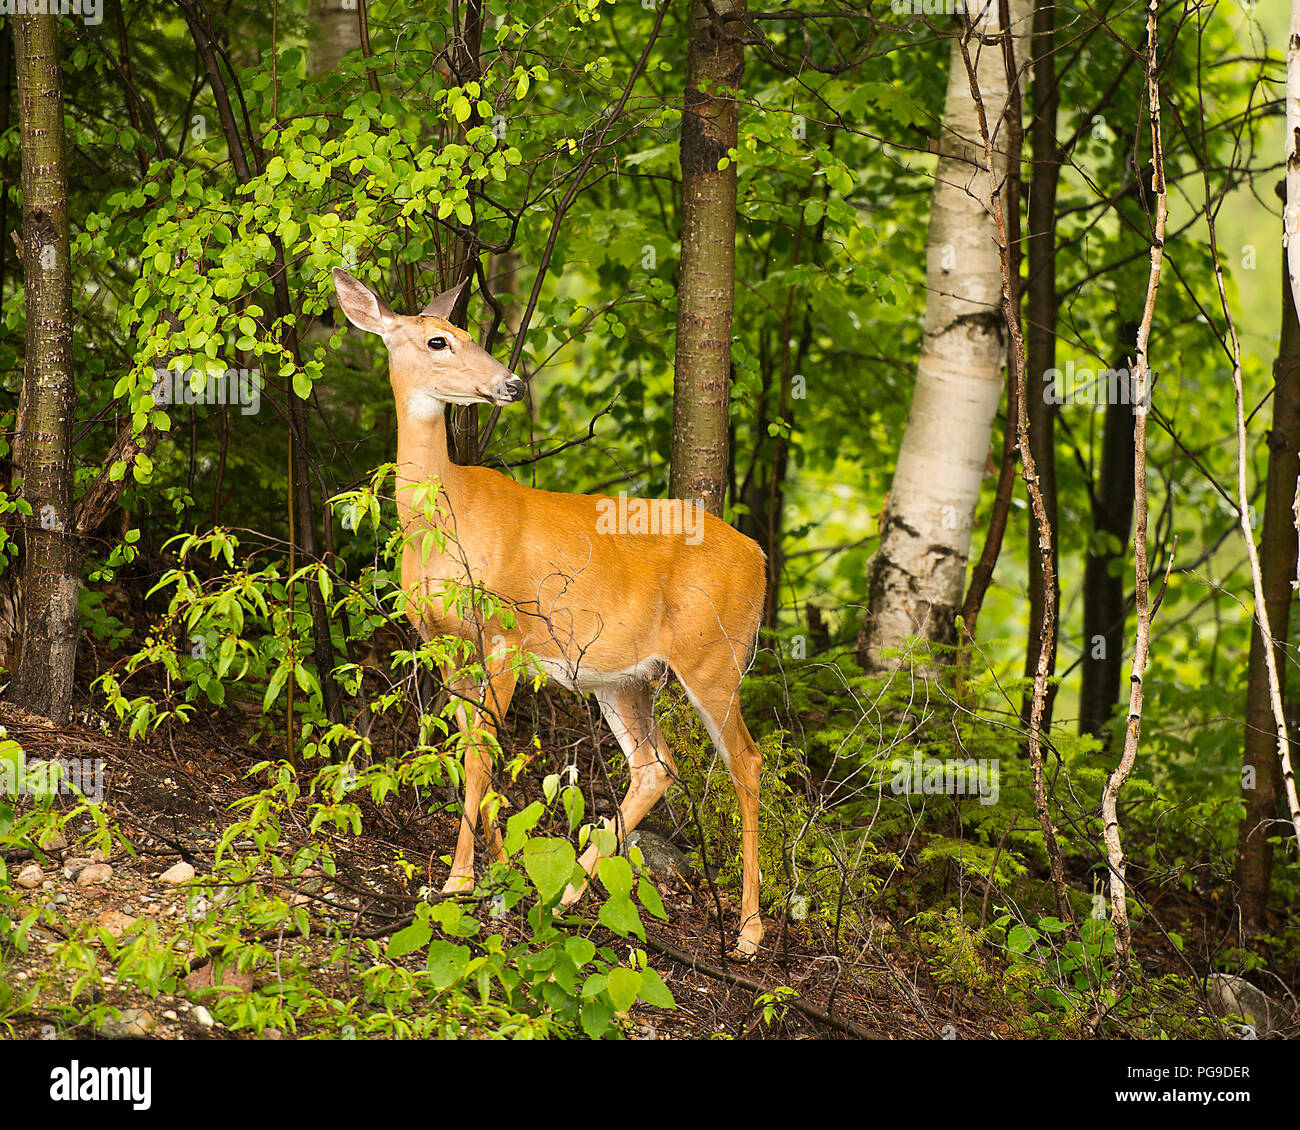 Deer animal in the forest displaying brown reddish fur, body, head, ears, eye, nose, legs with a foliage background of trees in its environment. Stock Photo